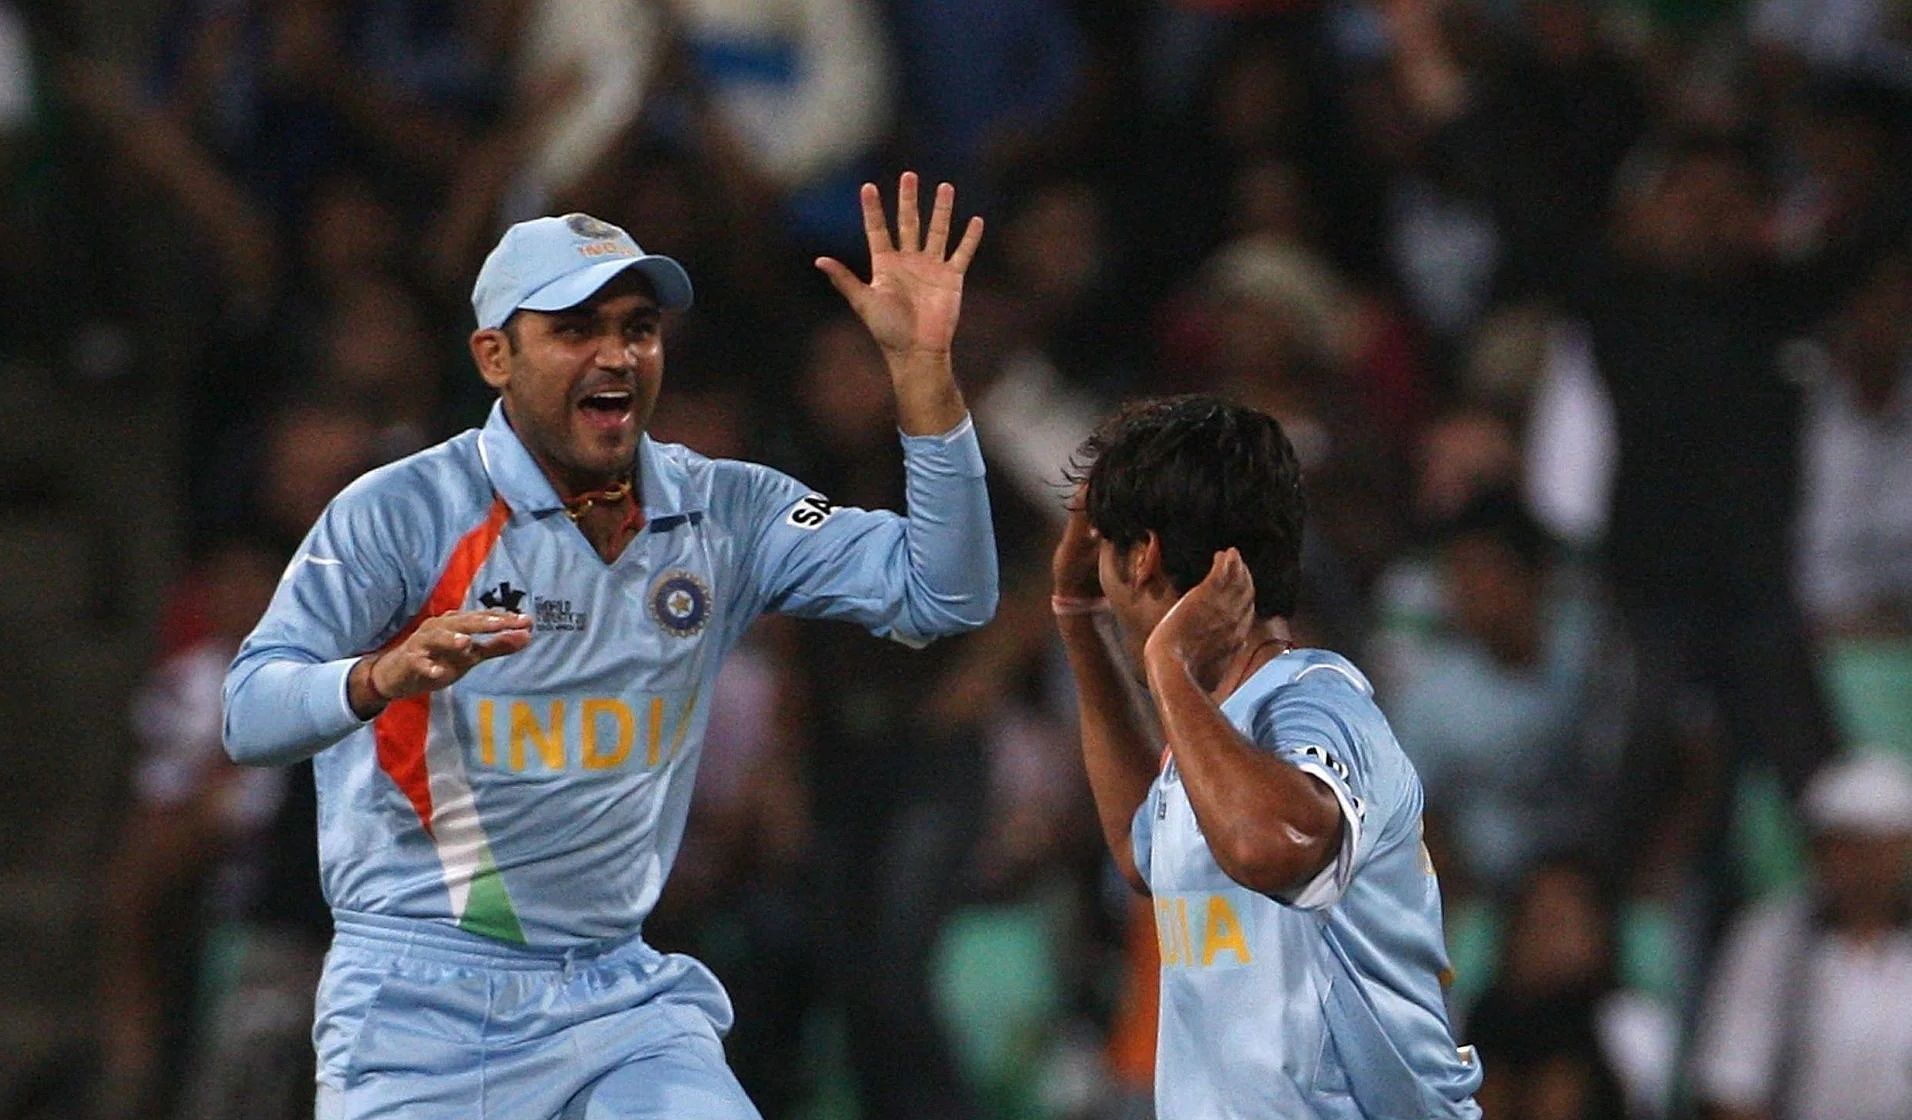 Virender Sehwag (left) celebrates a wicket during the 2007 T20 World Cup. Pic: Getty Images